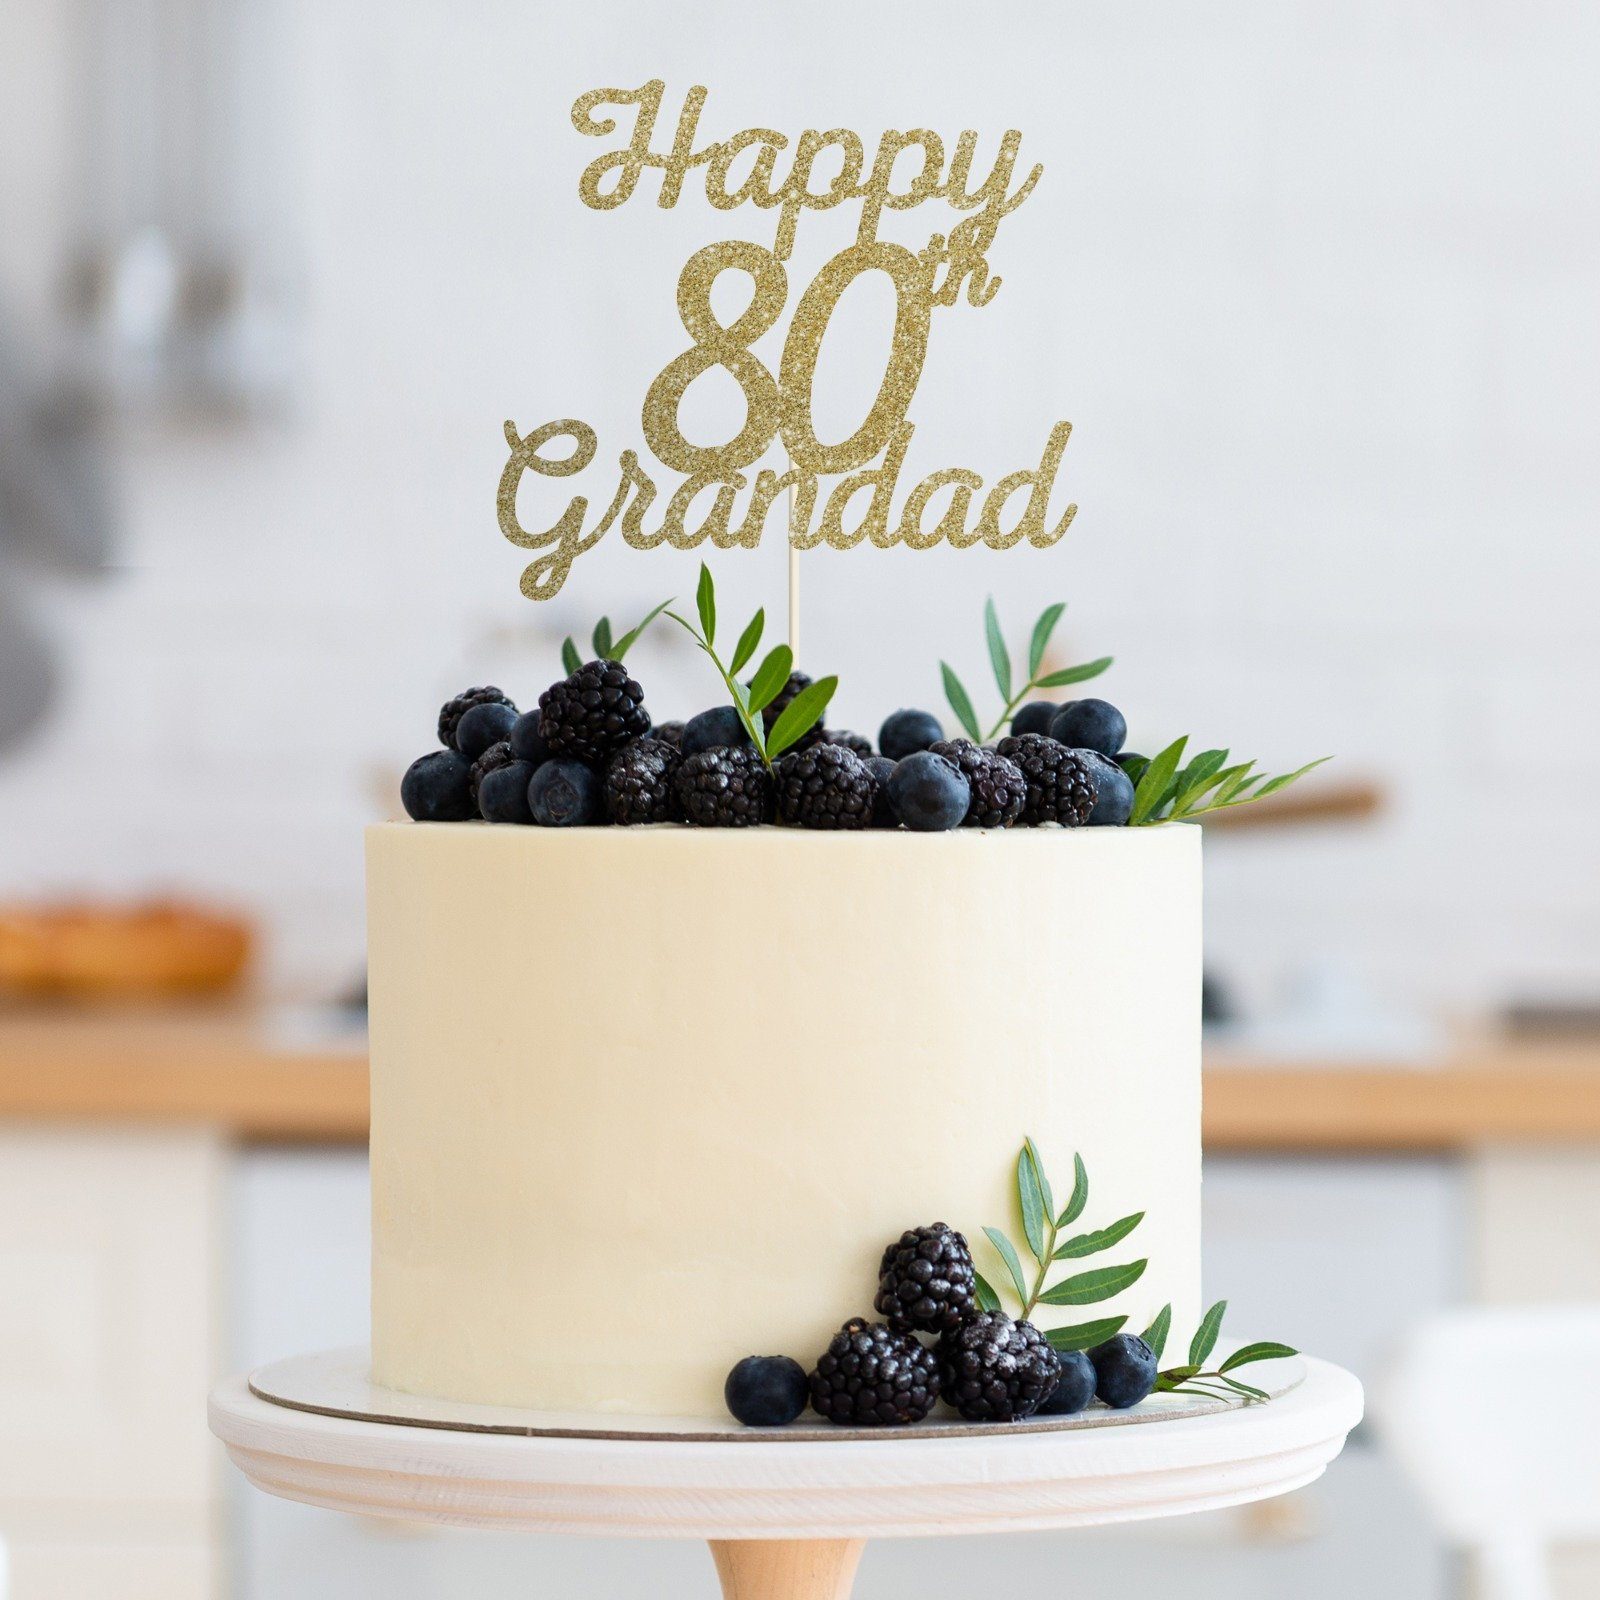 Sapna's Dreamy Cakes - Grandfather's birthday is always special. It is a  time to cherish all the love he keeps showering on his children and  grandchildren. Here is a lovely and delicious